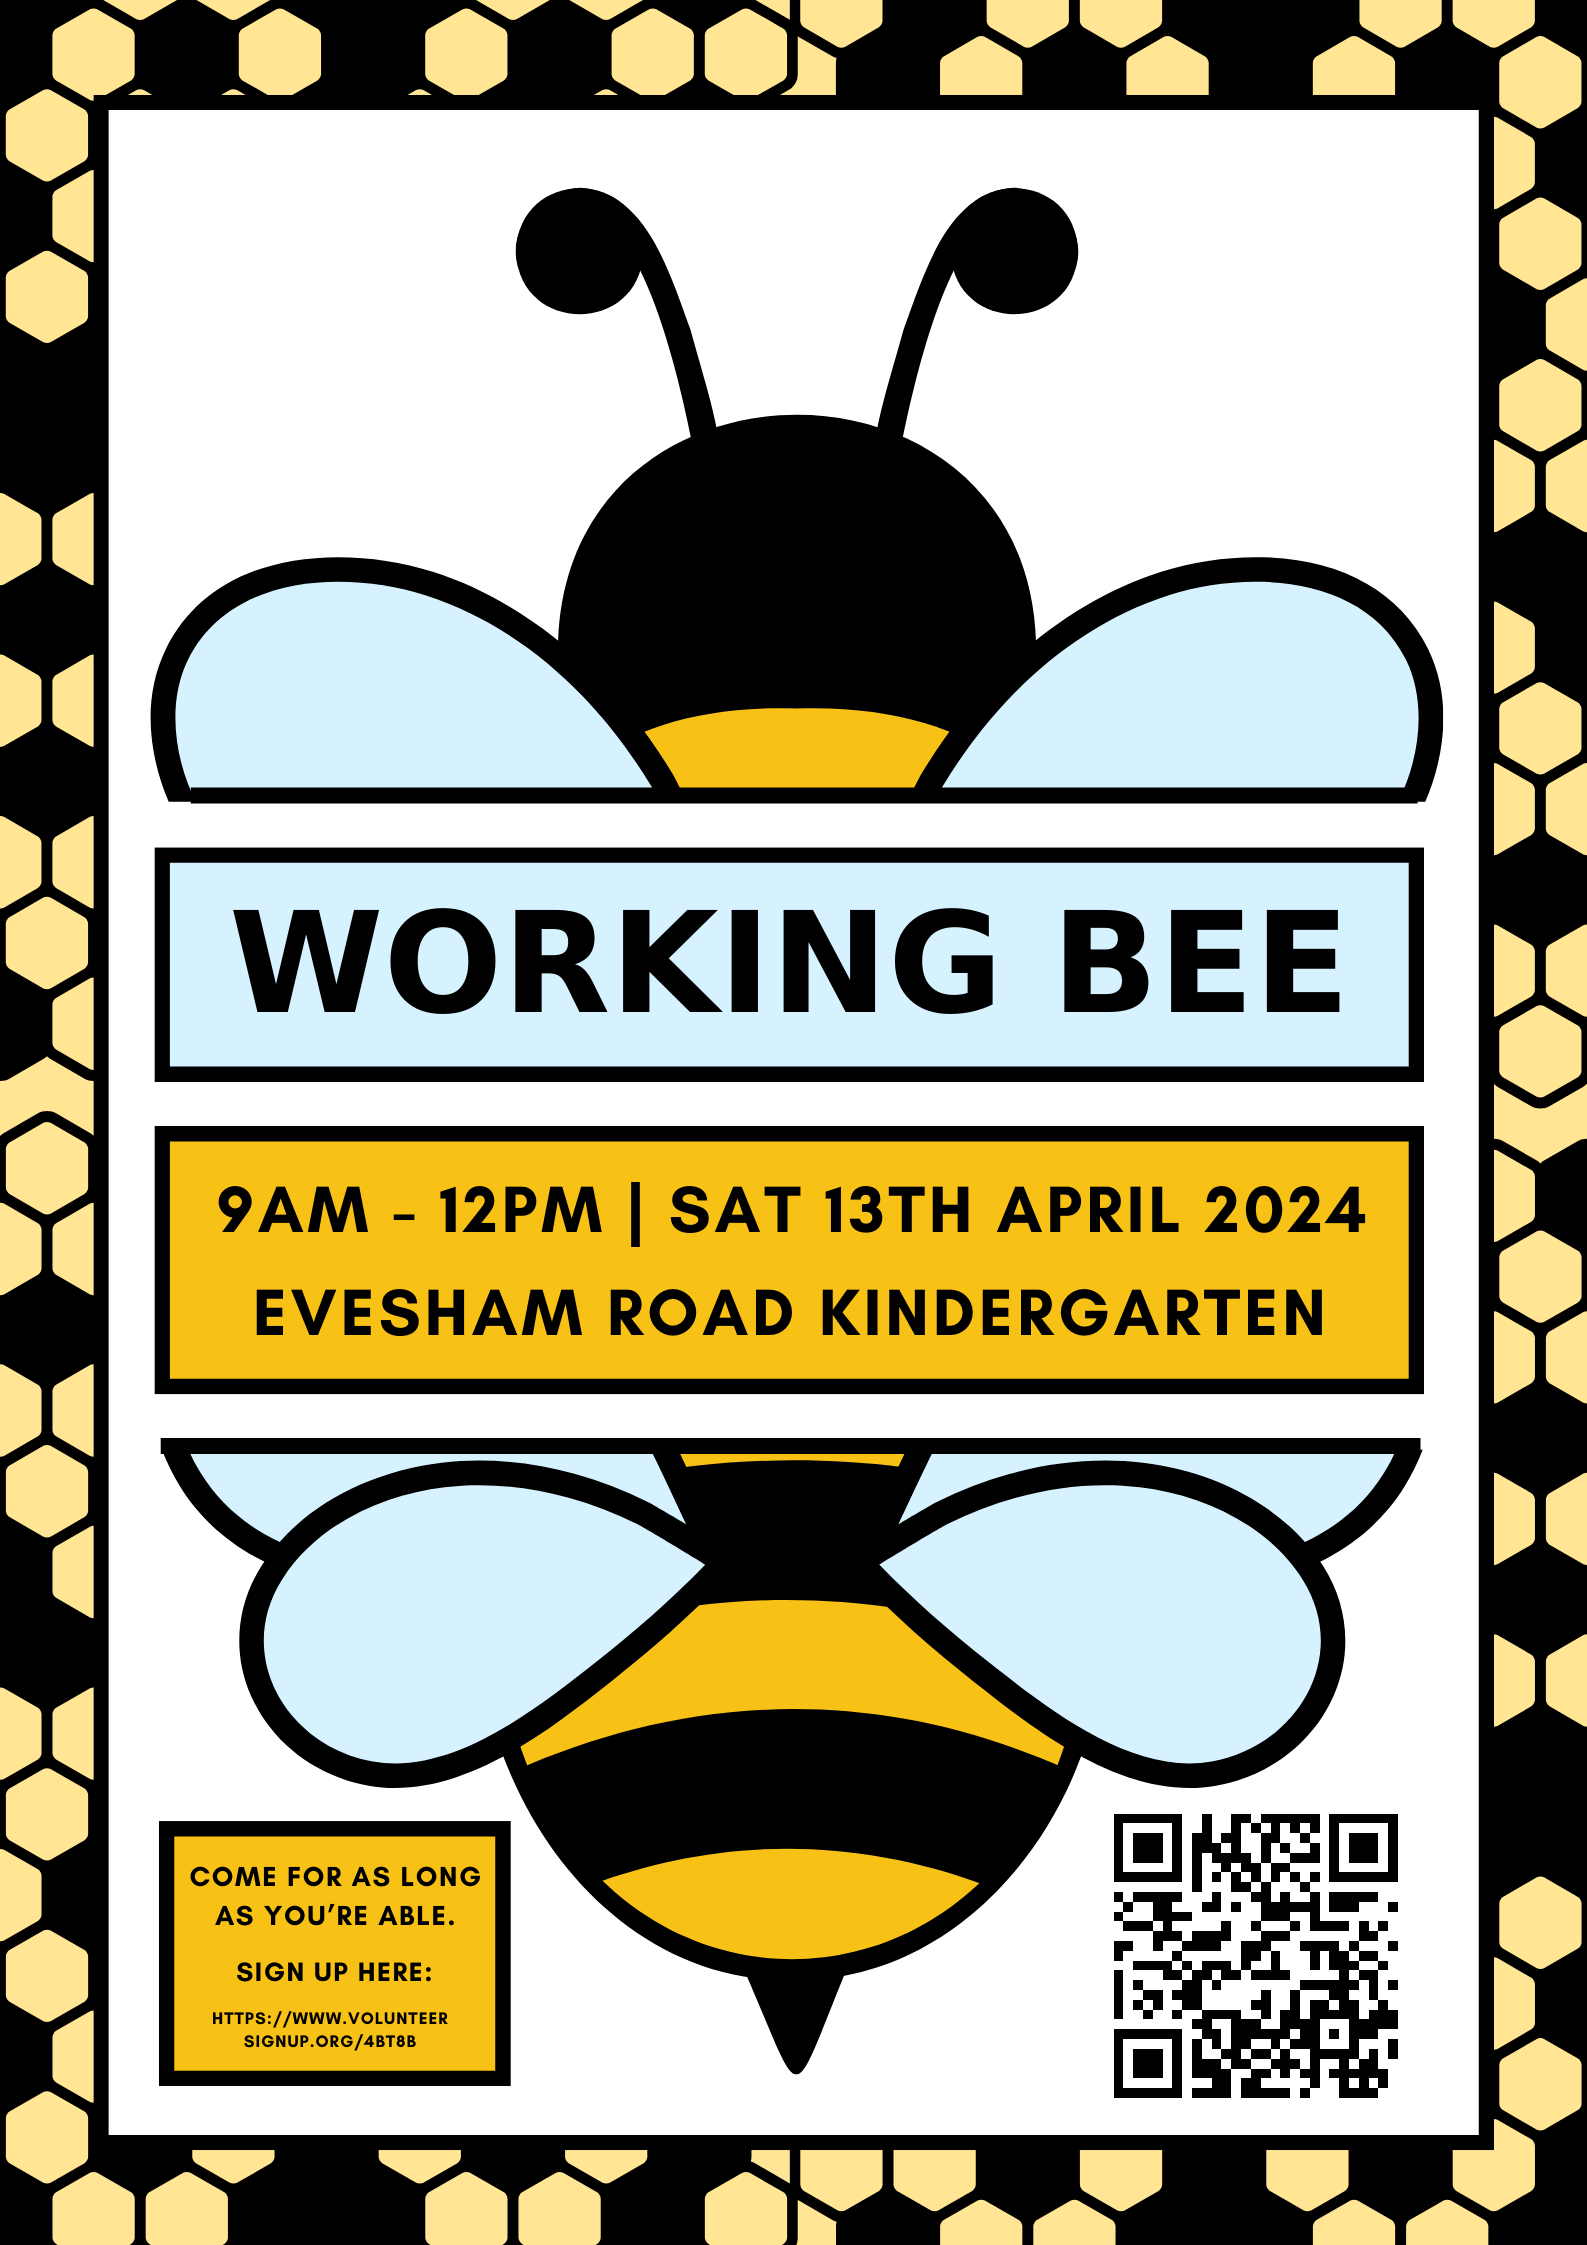 Working Bee – Sat 13th April 9am-12pm